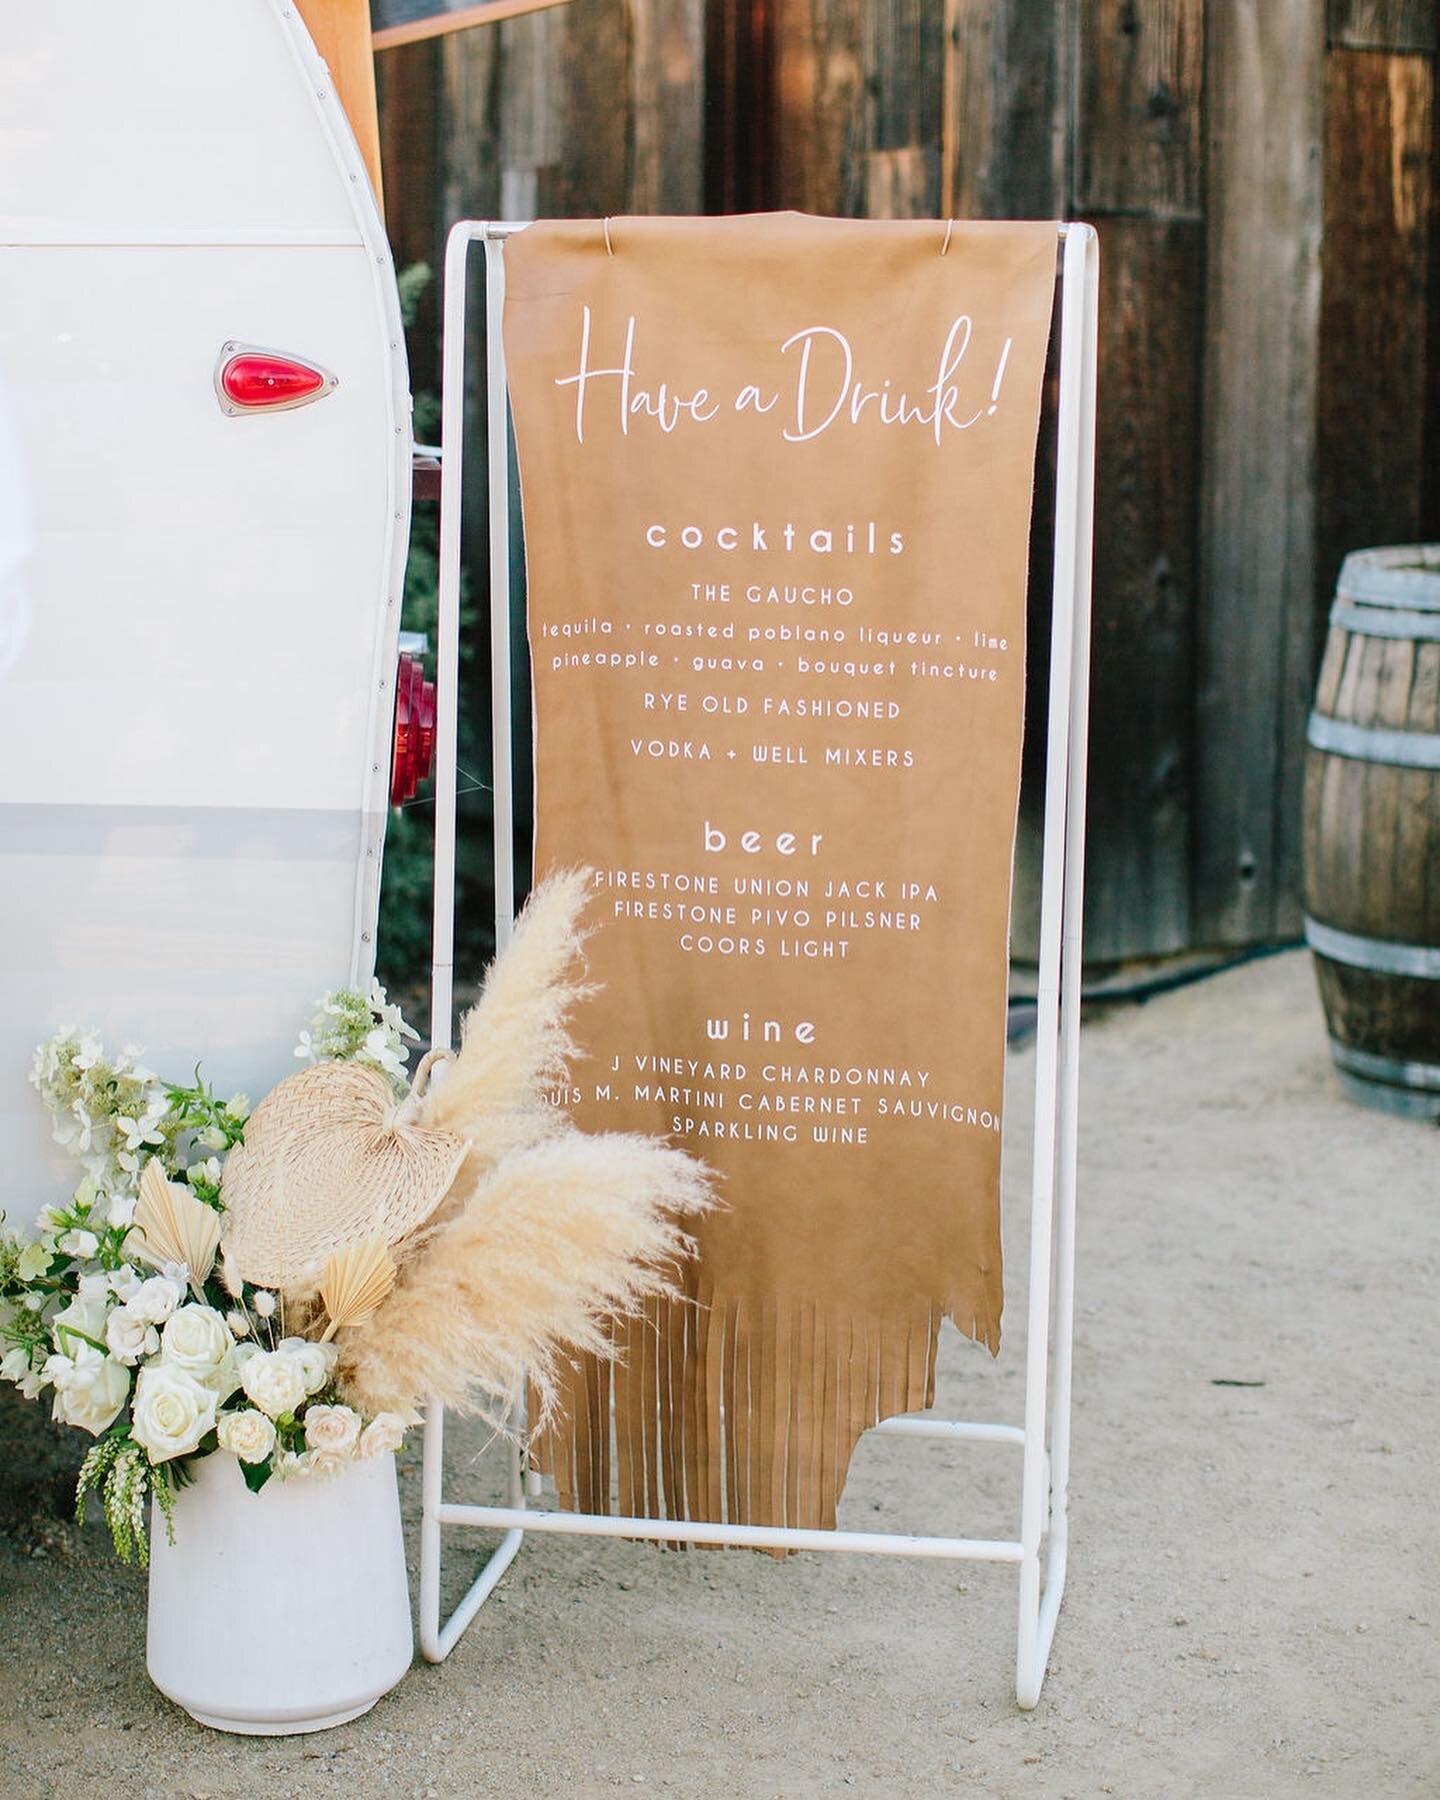 Leather signage we made for K+K&rsquo;s organic and beautiful wedding. 🌾 We offered woven fans at the ceremony to try to beat the heat, but a guest decided theirs worked better in a floral arrangement. Good thing it blends in! 🙃
Photo @mirellecarmi